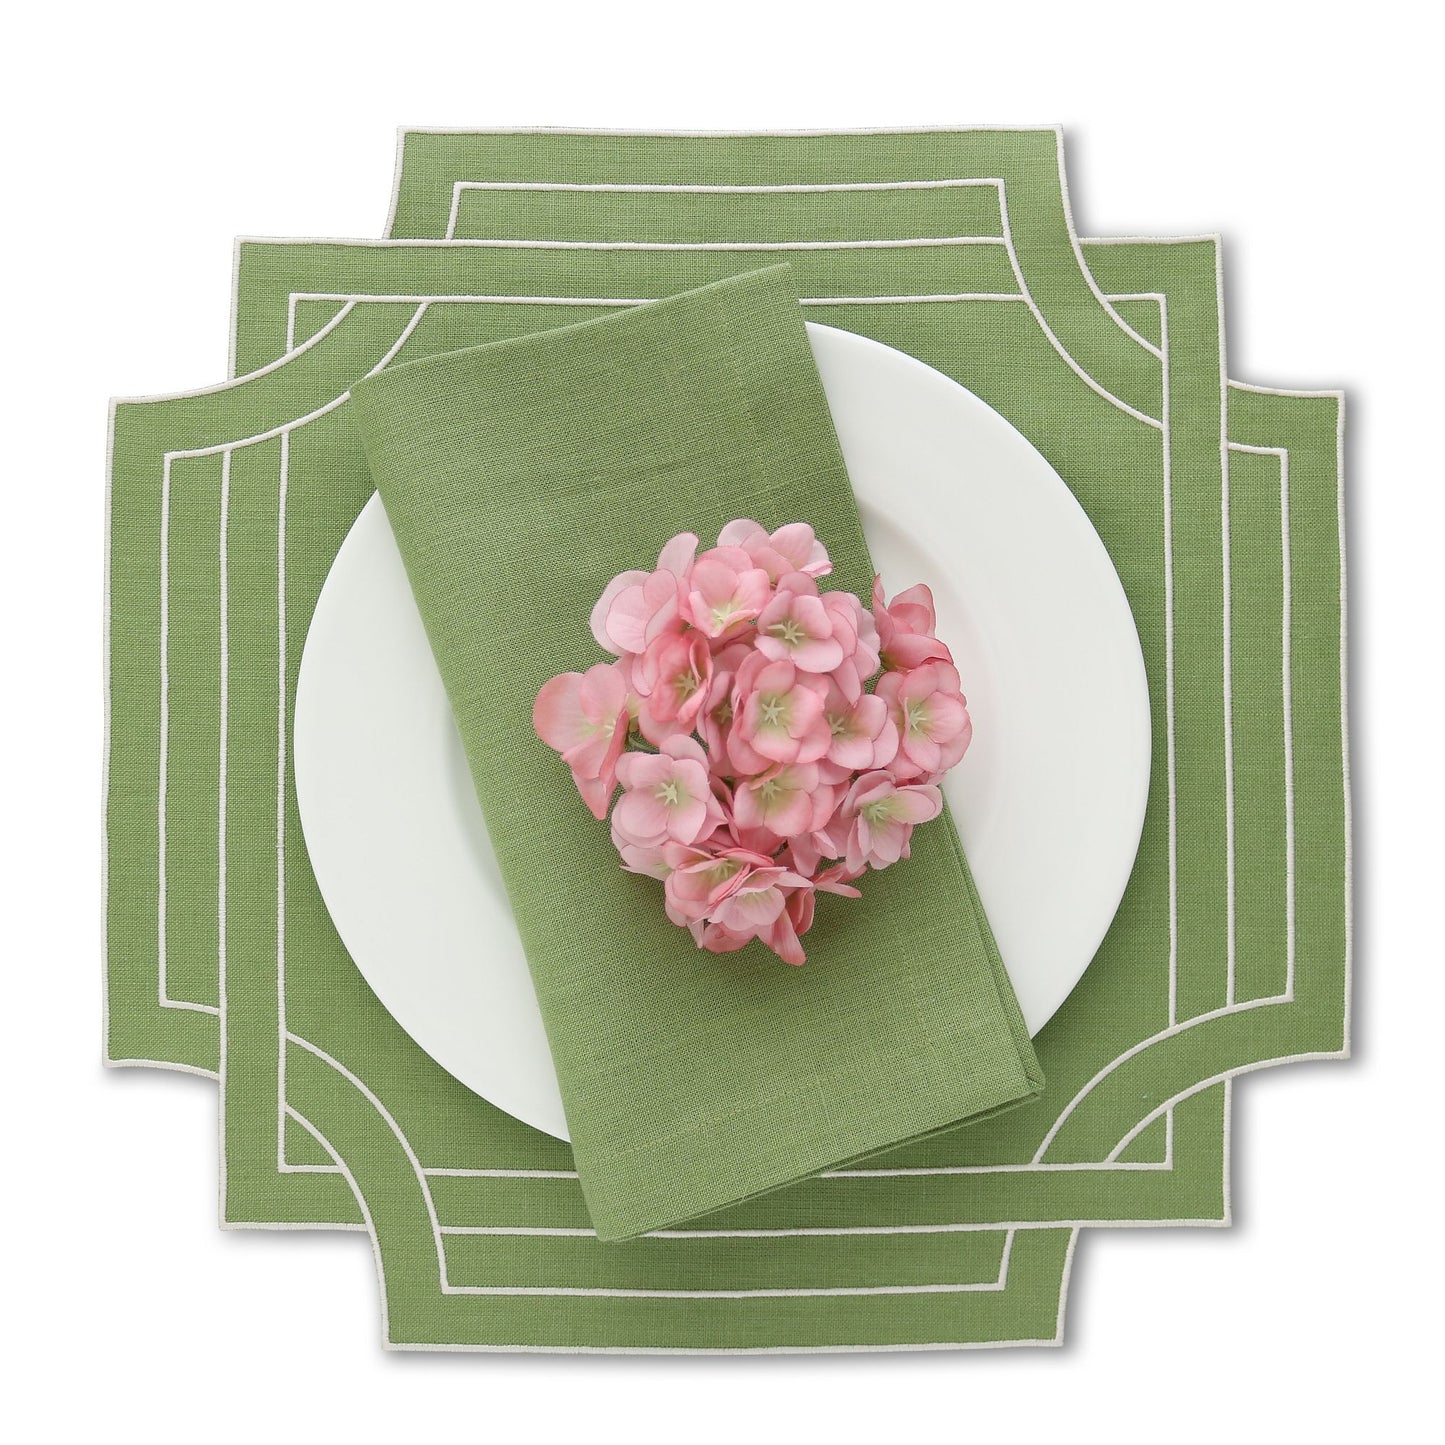 Made to order Mateo Octagonal linen dinner napkins and placemats (set of 4)